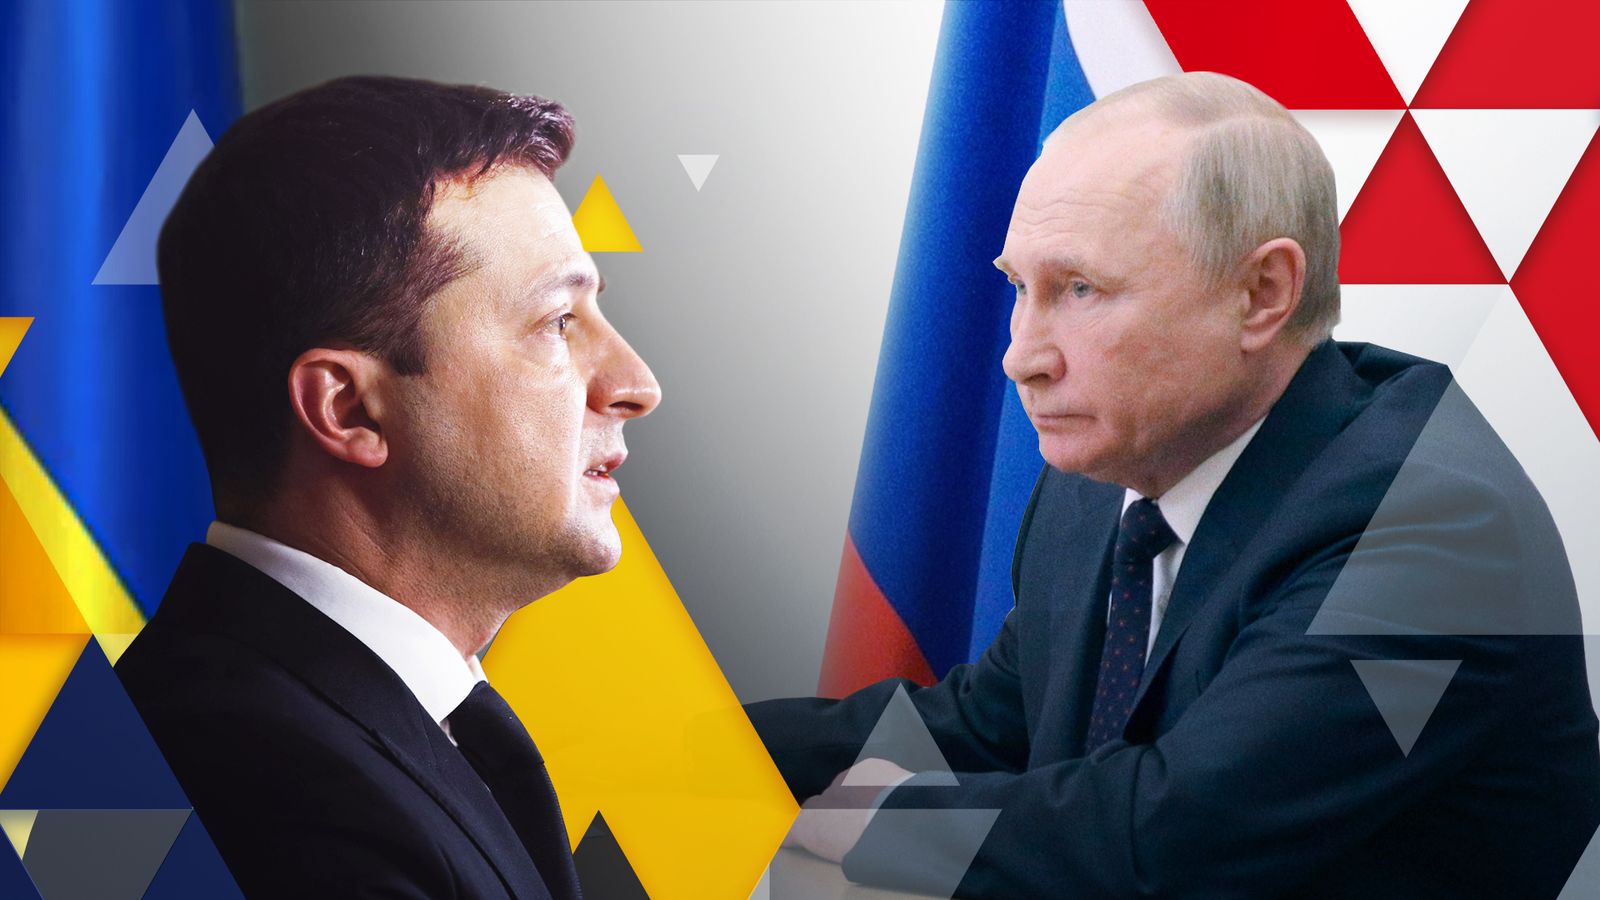 Ukraine war: Zelenskyy offers Vladimir Putin route to exit disastrous  conflict - but will Russia's leader budge? | World News | Sky News